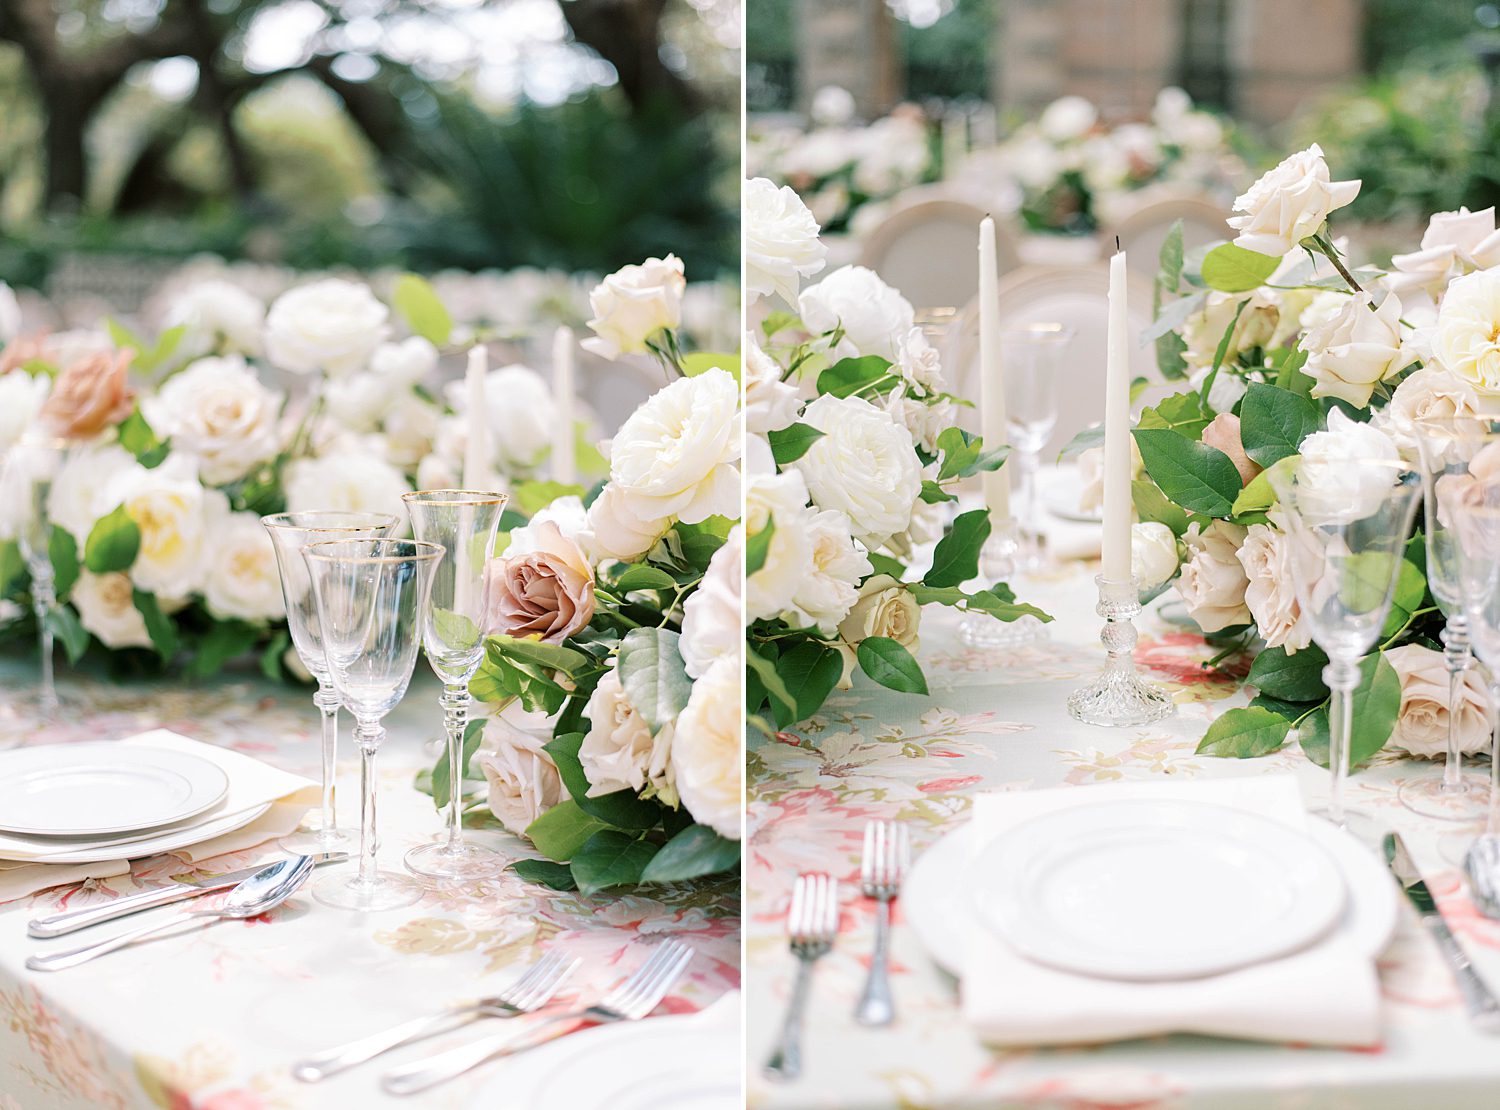 wedding reception with ivory candles and place setting at Vizcaya Museum